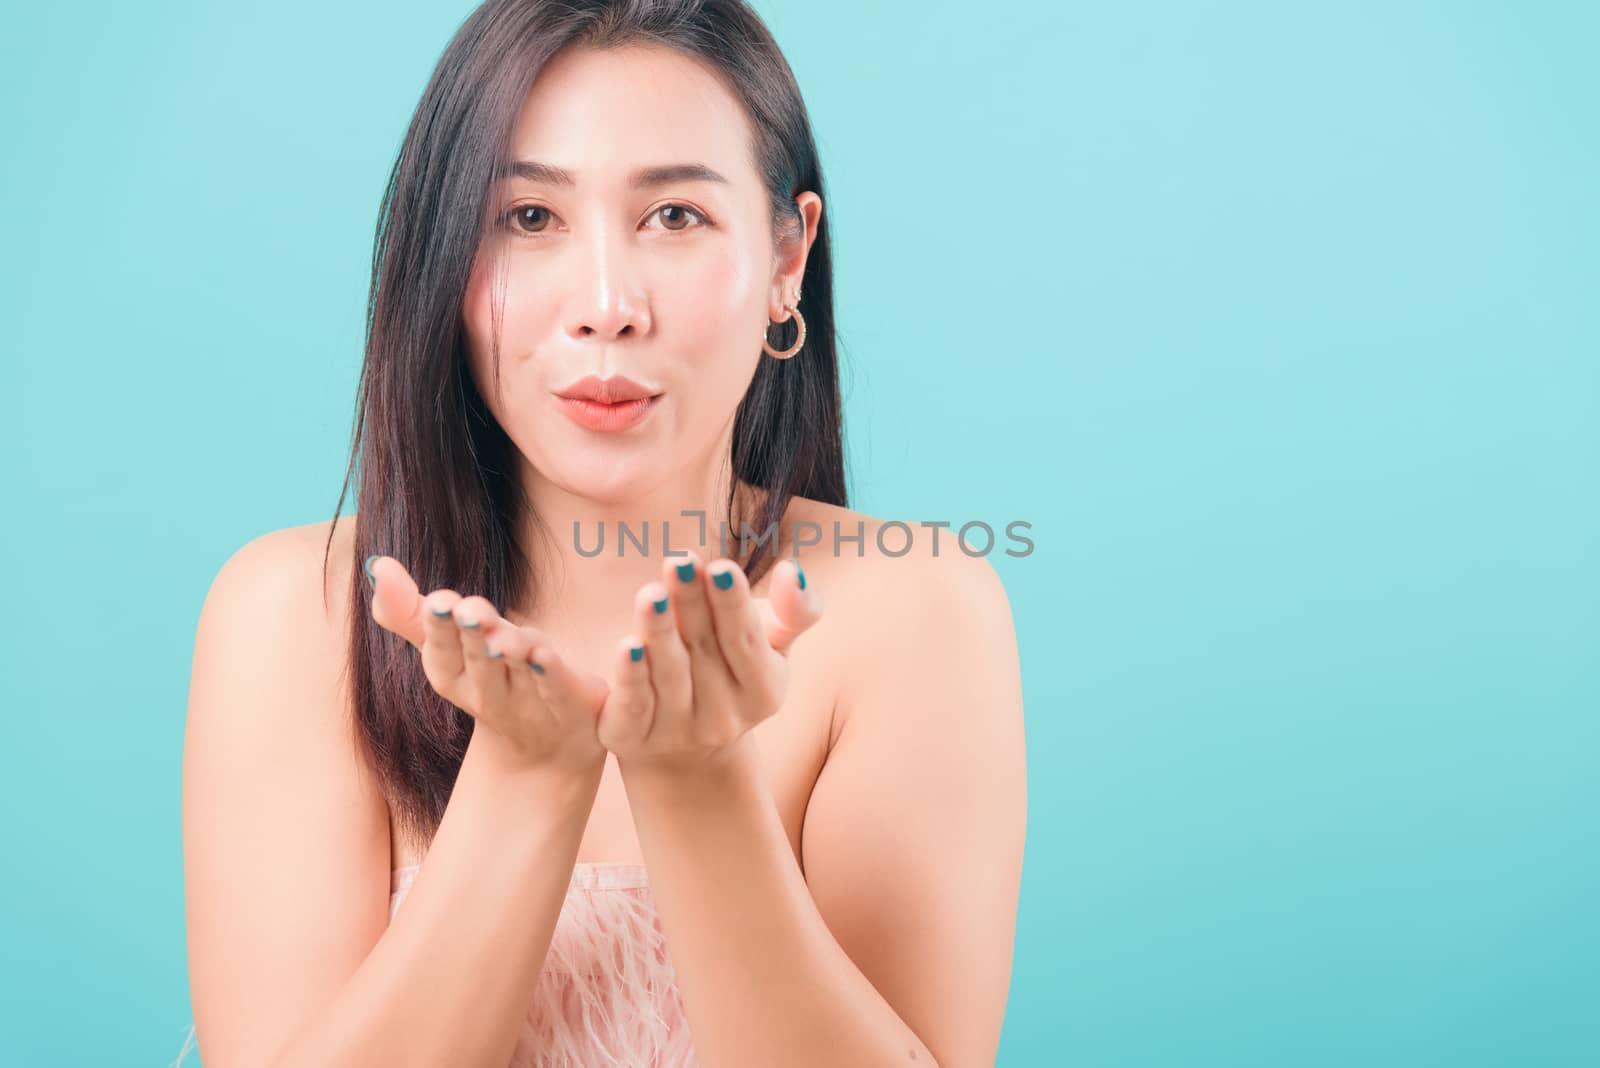 woman standing smiling blowing something on hands by Sorapop